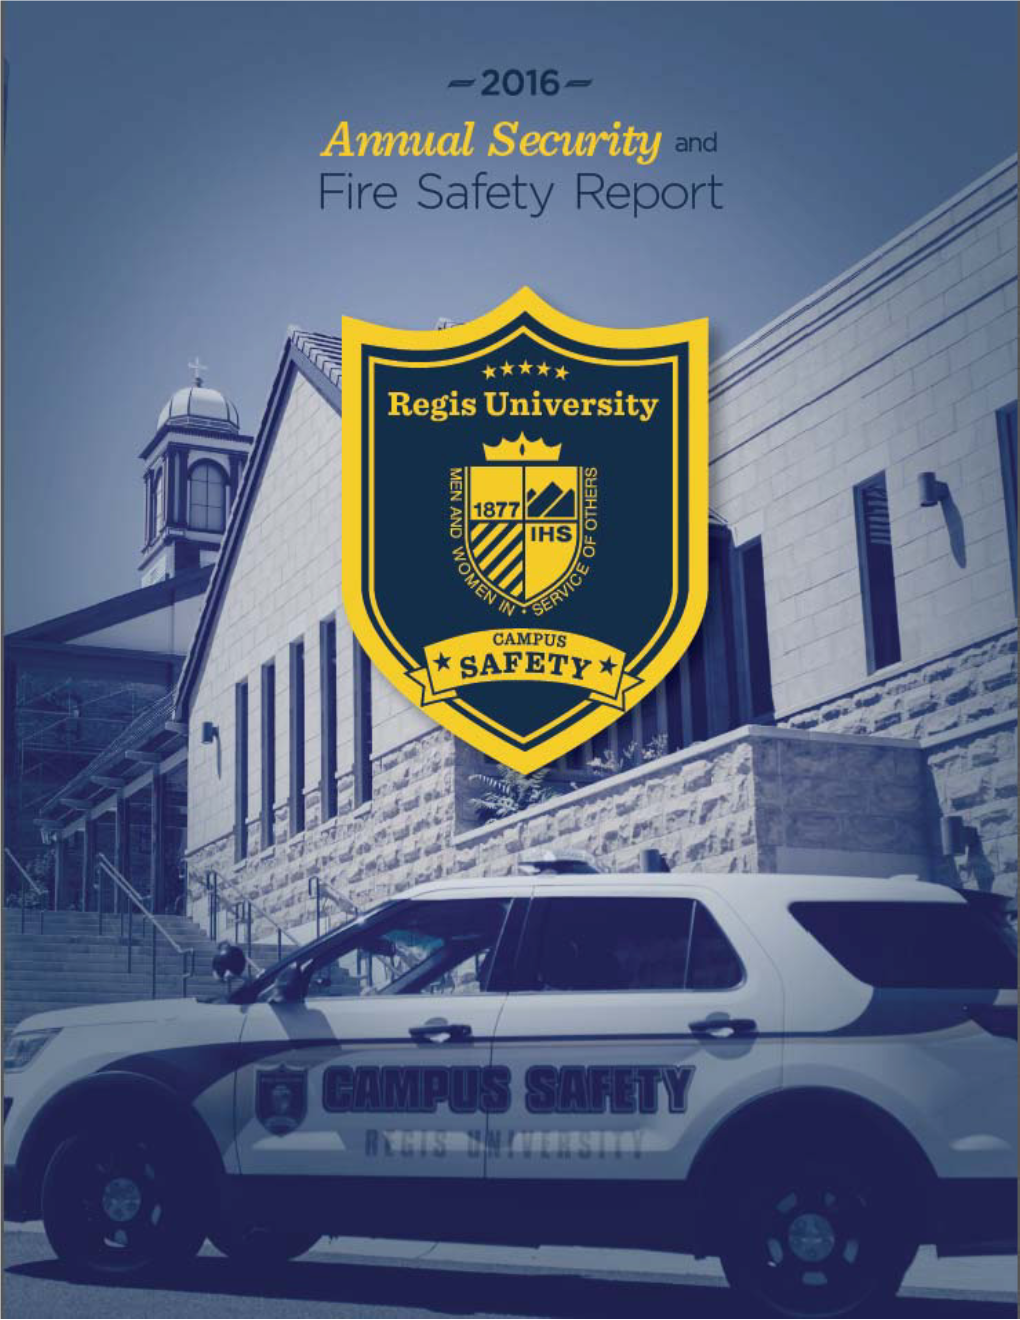 Regis University's Annual Security and Fire Safety Report